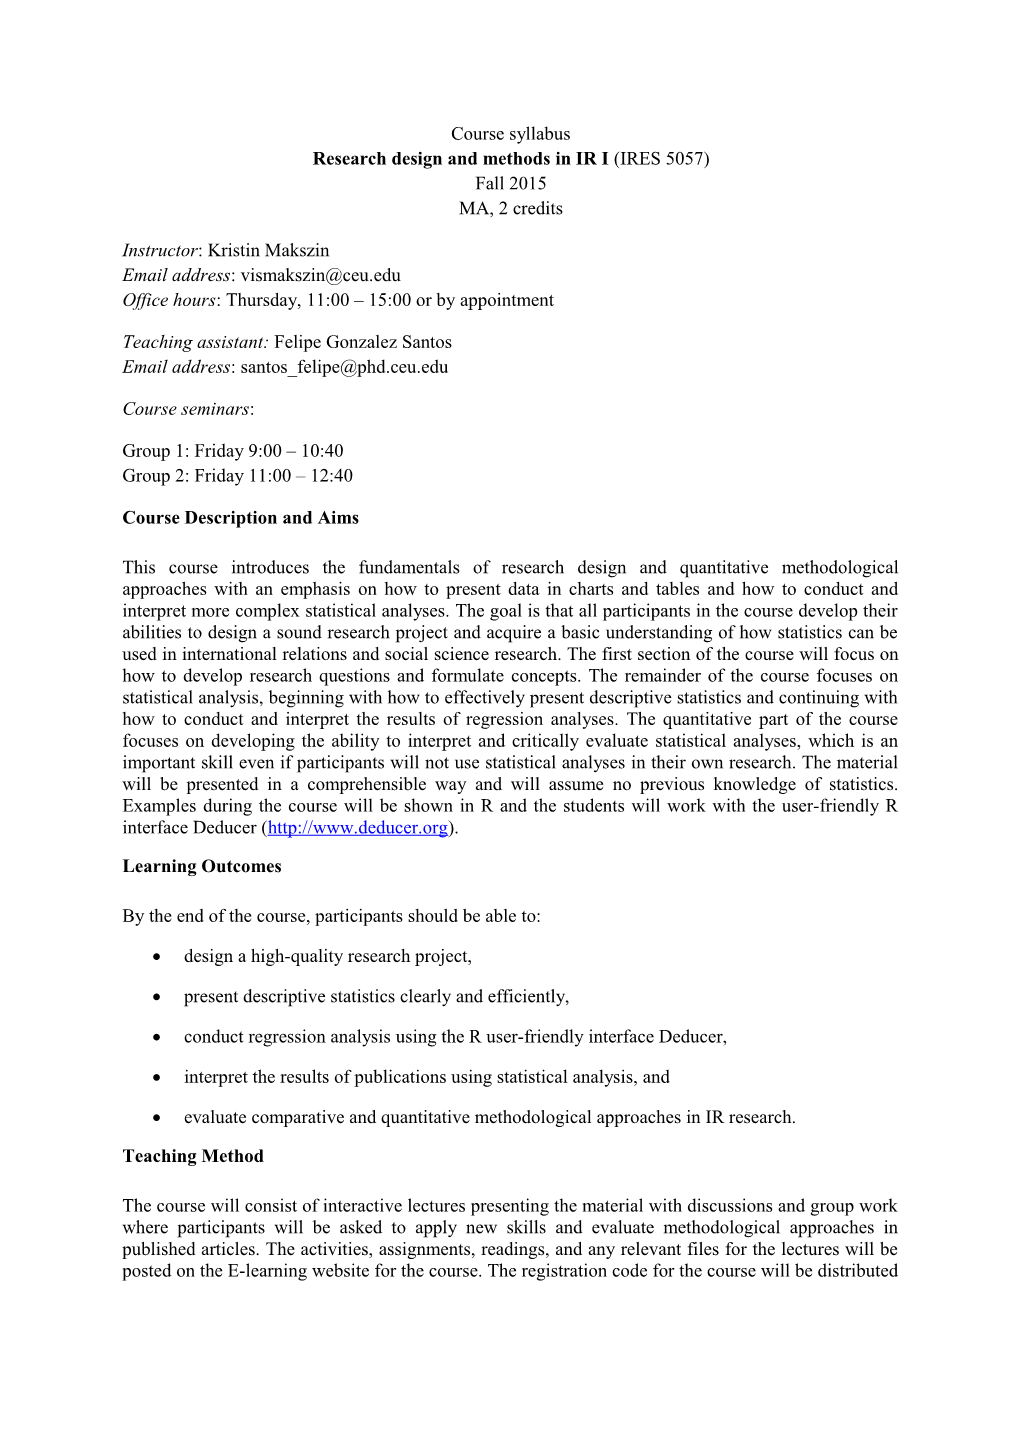 Course Syllabus Research Design and Methods in IR I (IRES 5057) Fall 2015 MA, 2 Credits